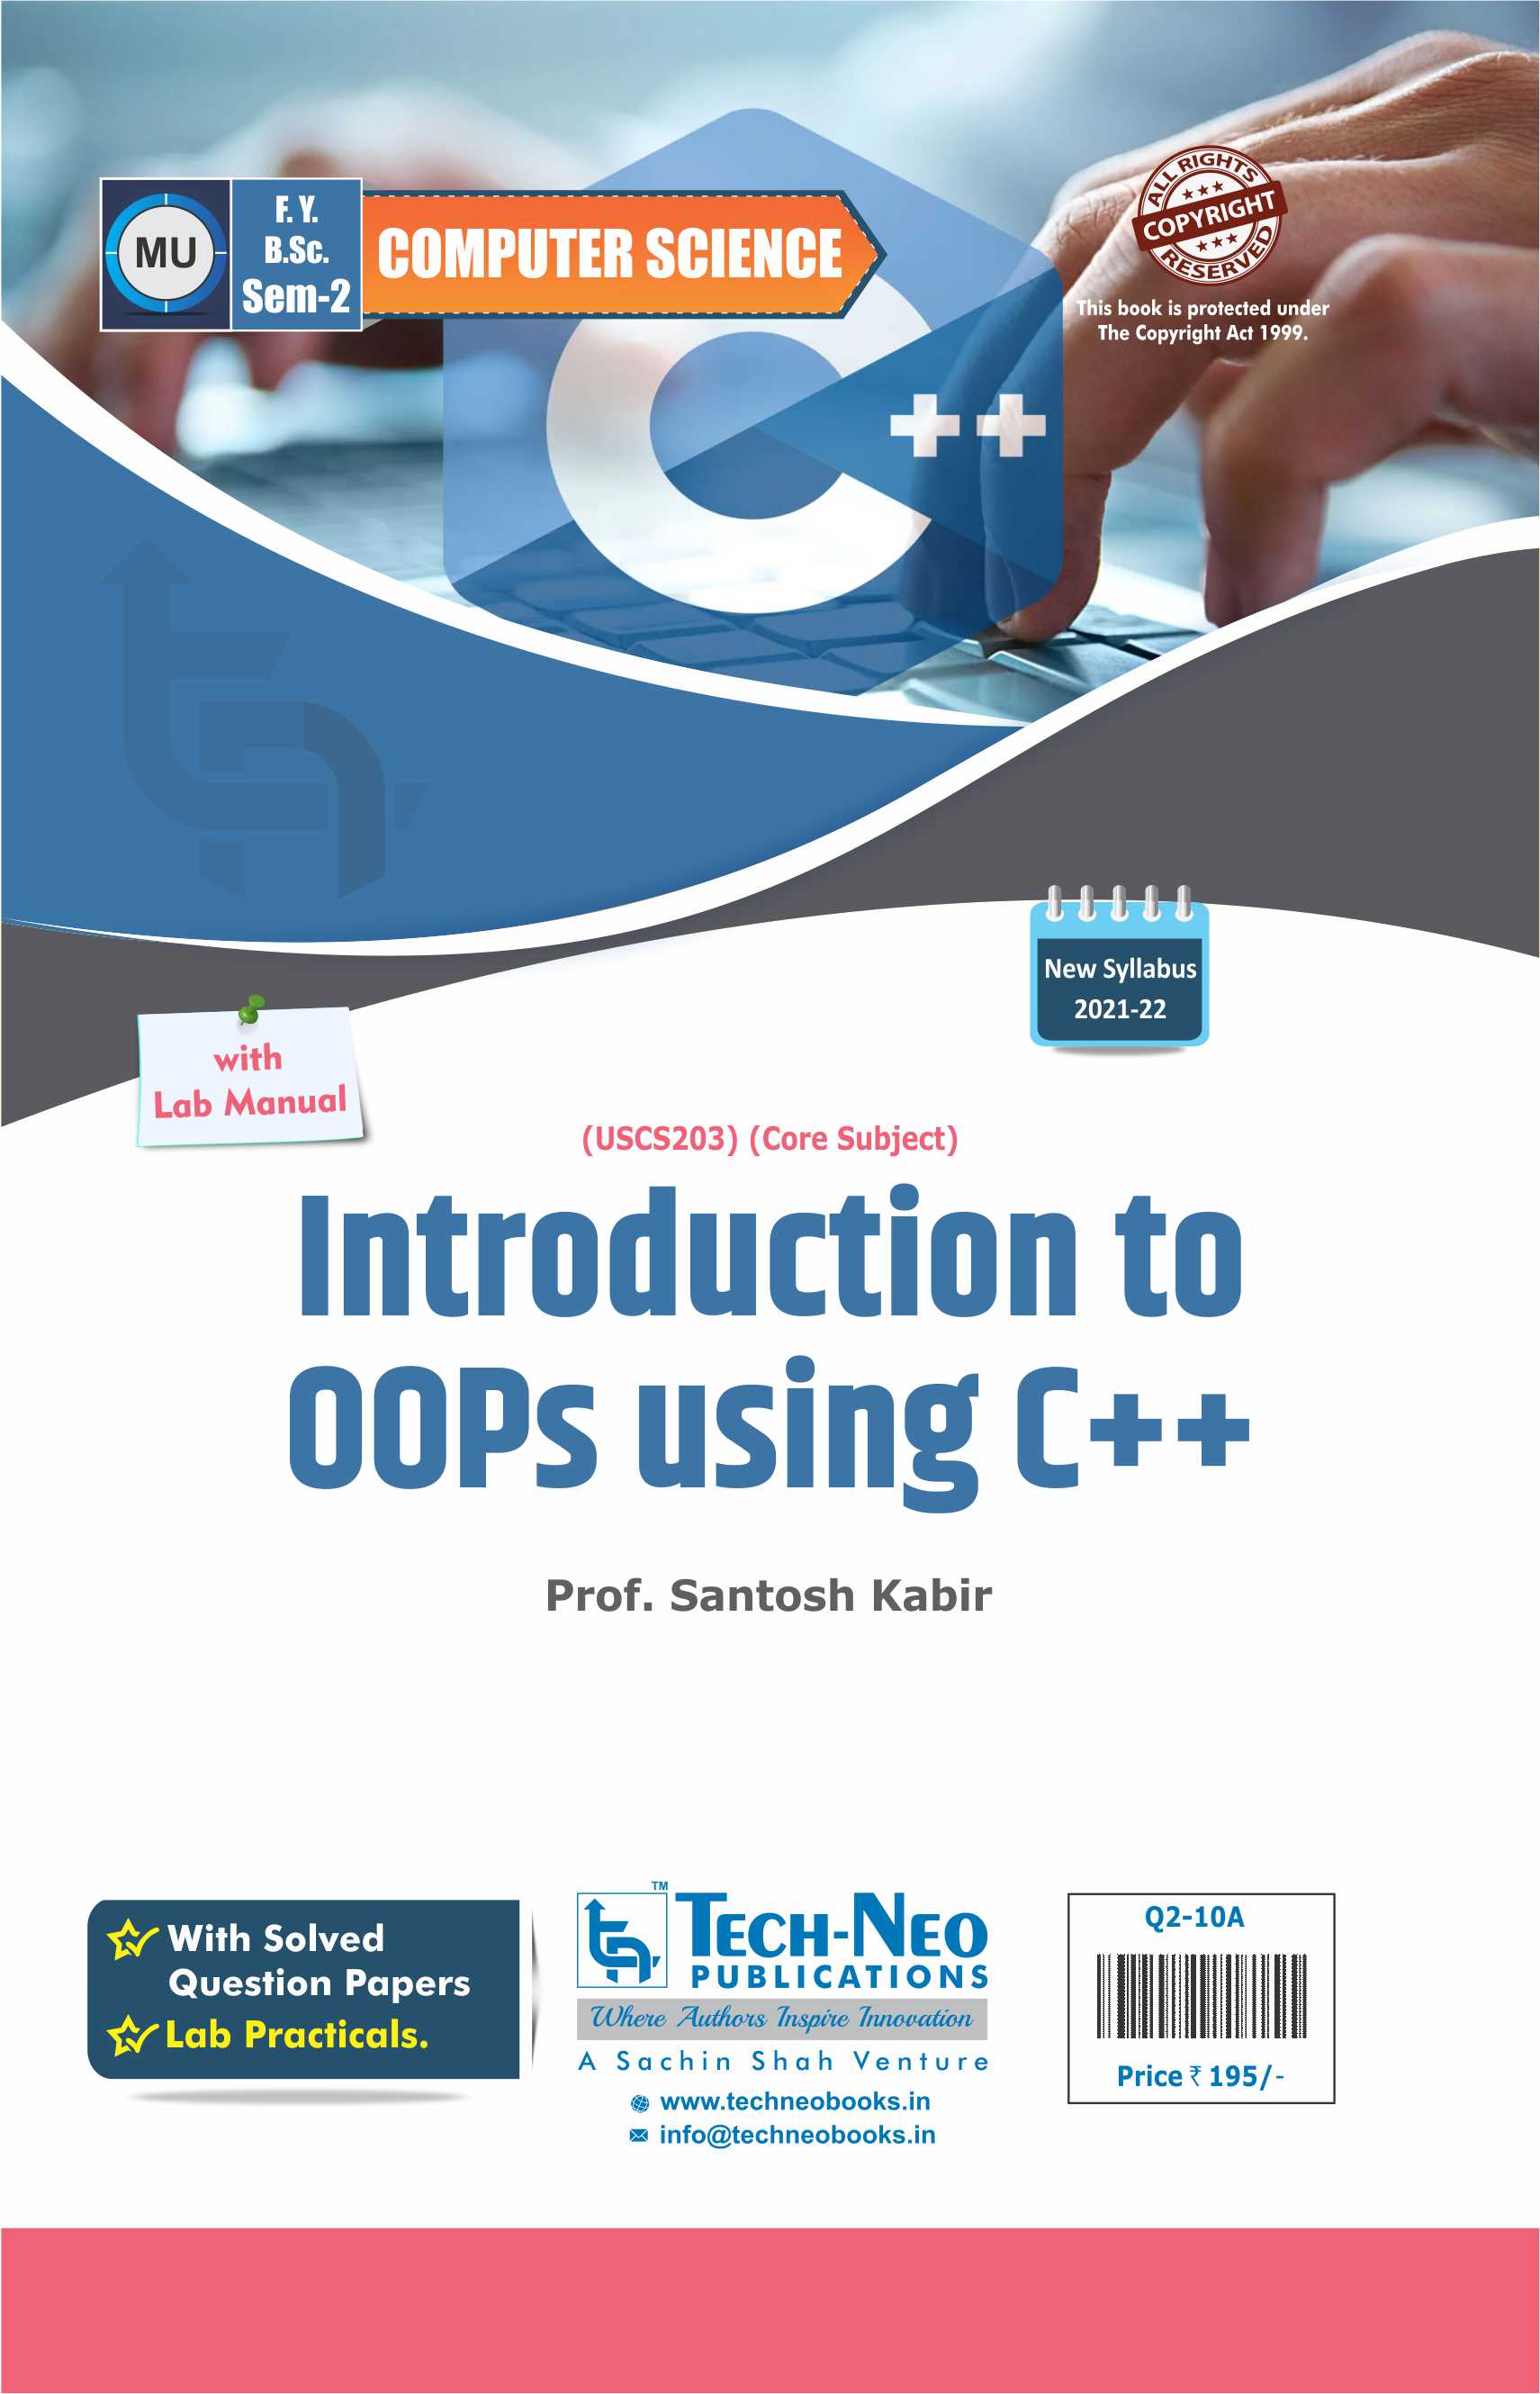 Introduction to OOPs using C++